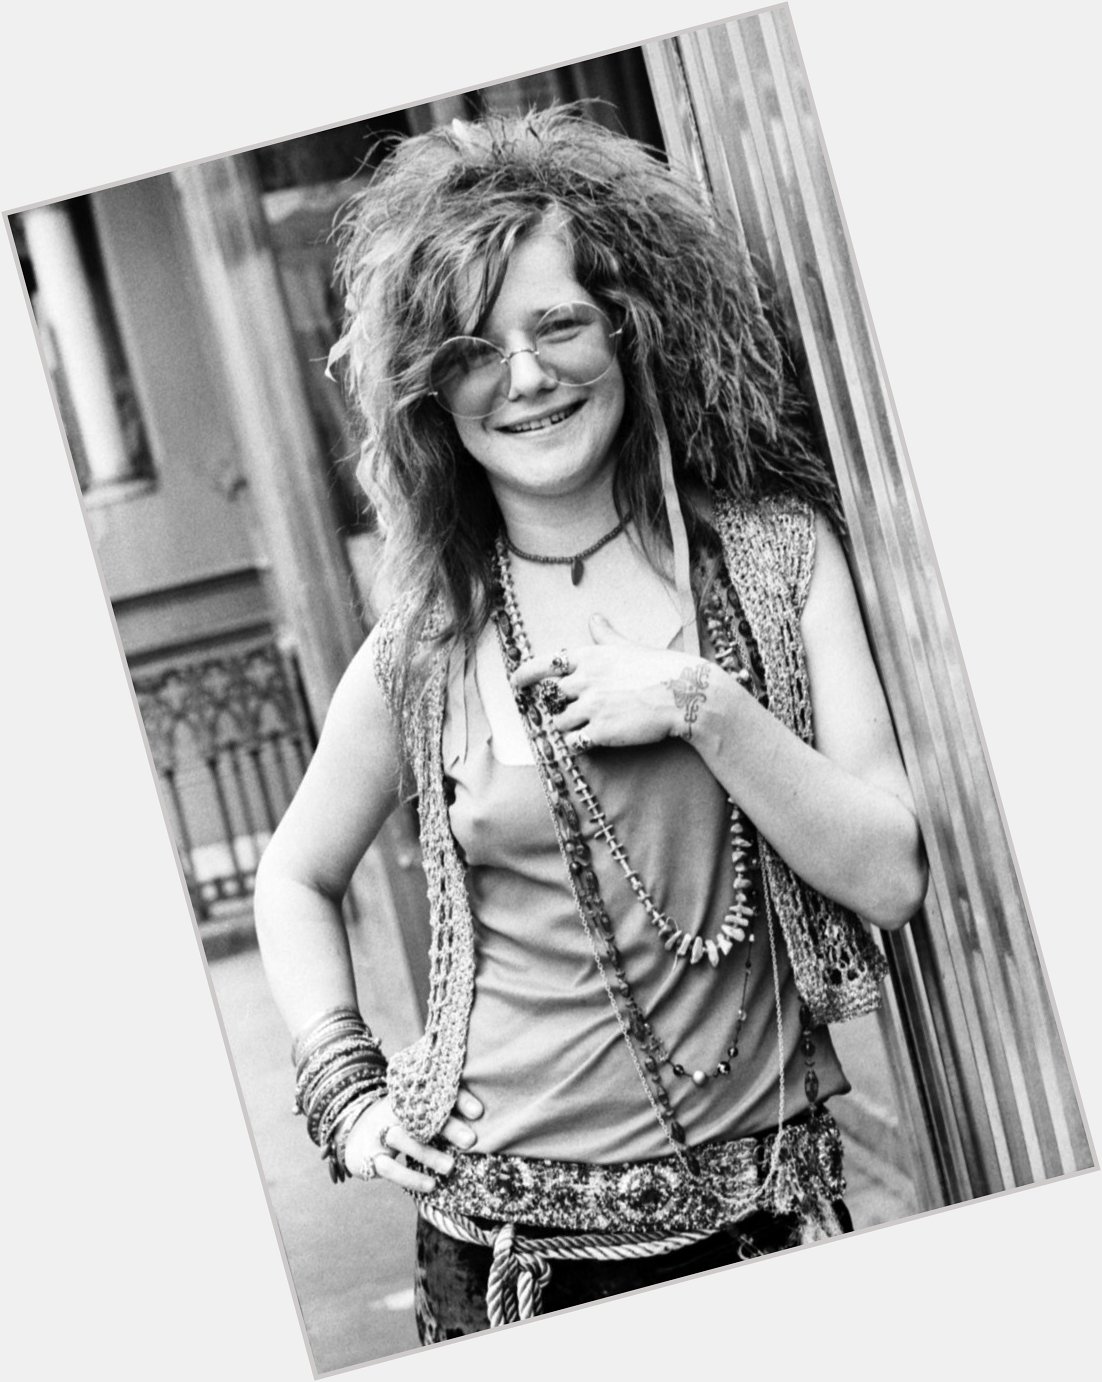 Happy birthday to the queen and my inspiration in music, Janis Joplin.  